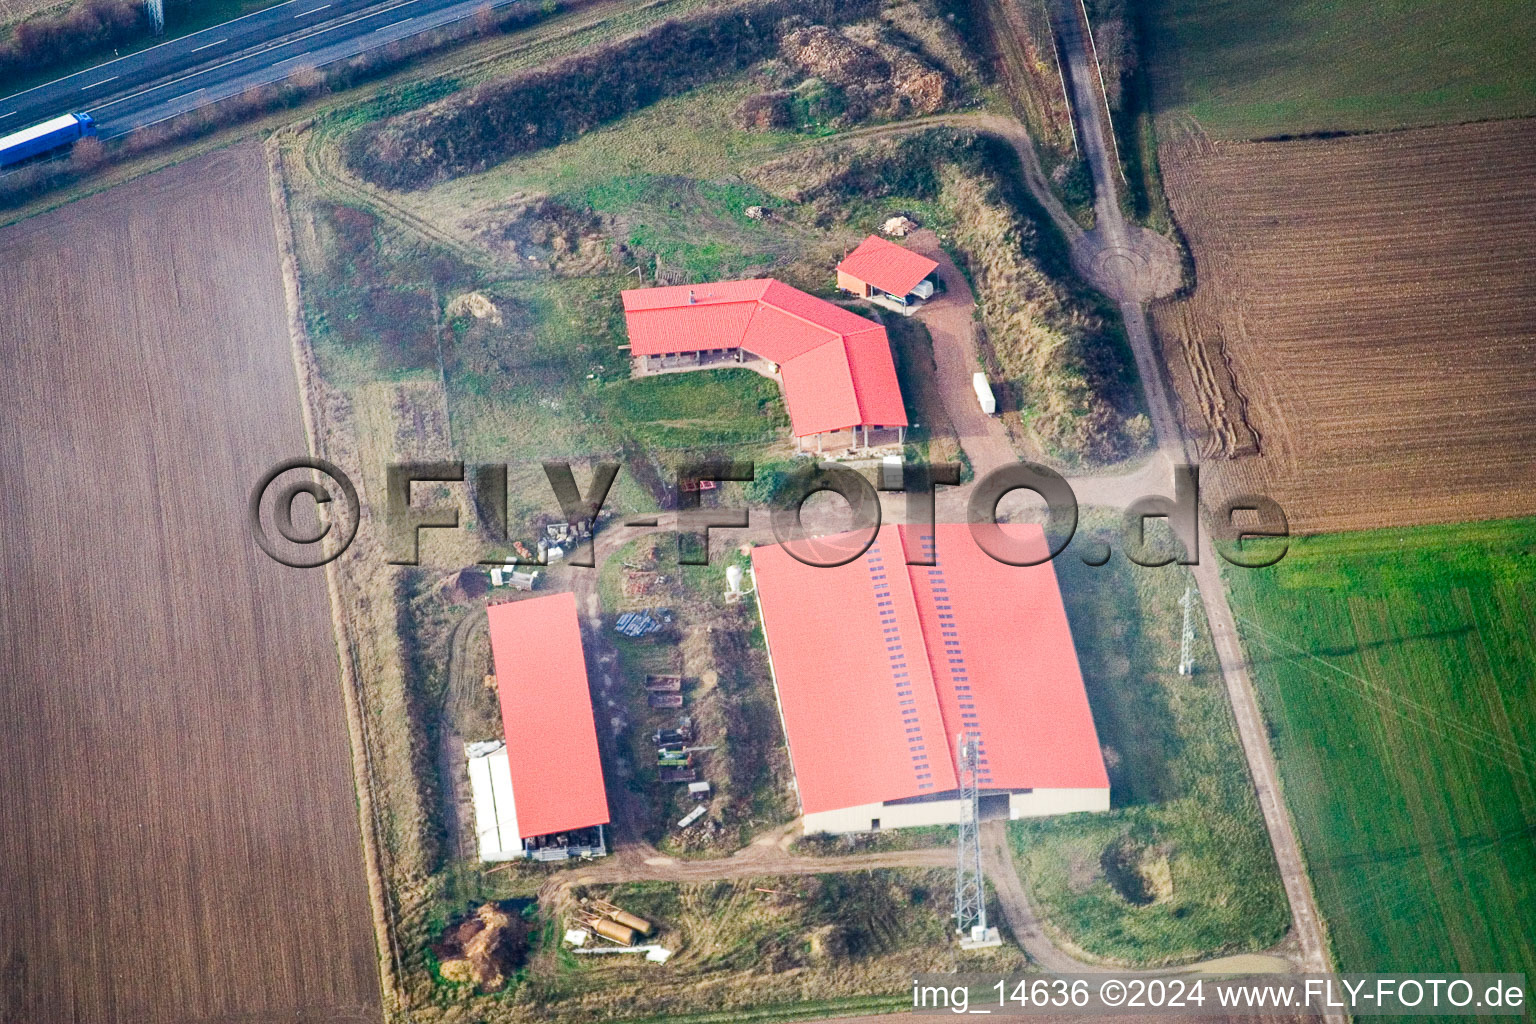 Chicken farm egg farm in Erlenbach bei Kandel in the state Rhineland-Palatinate, Germany from the plane